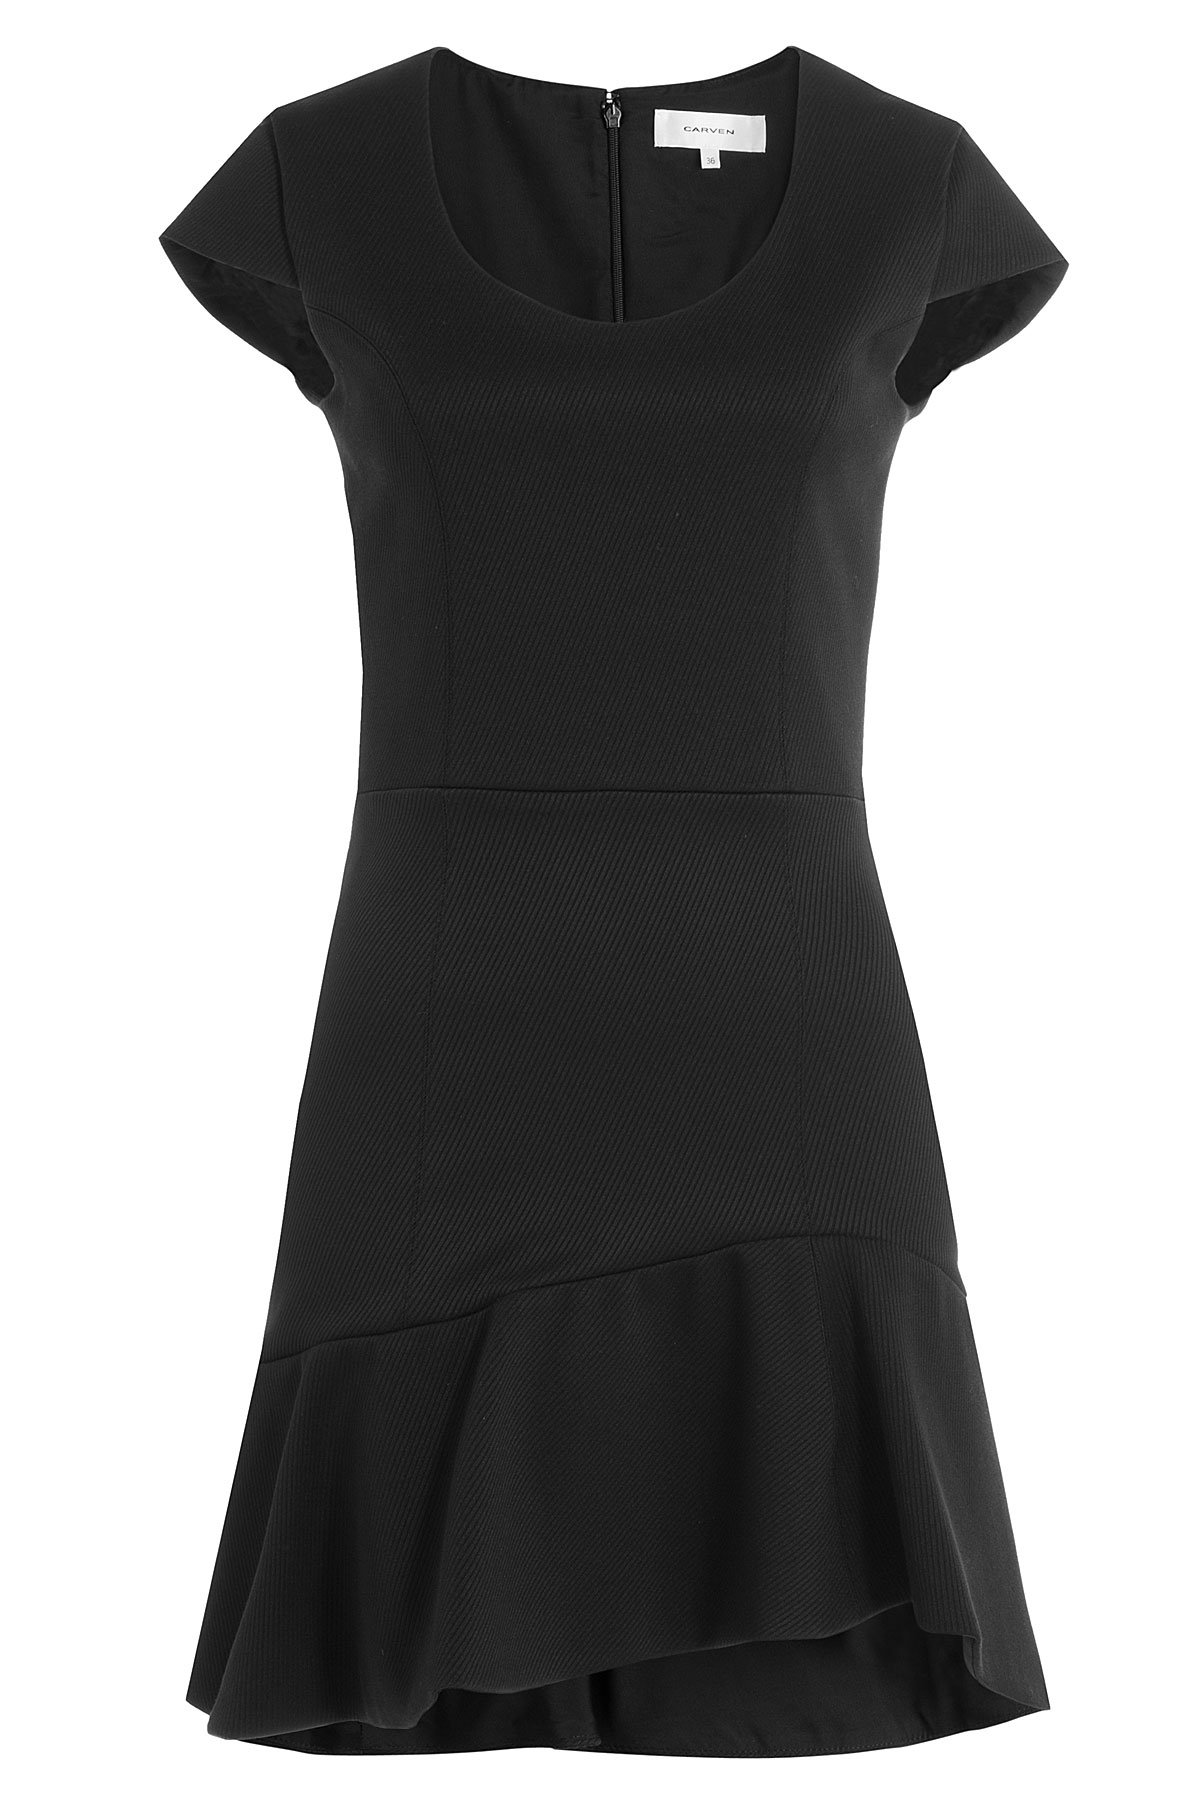 Carven - Dress with Ruffled Skirt